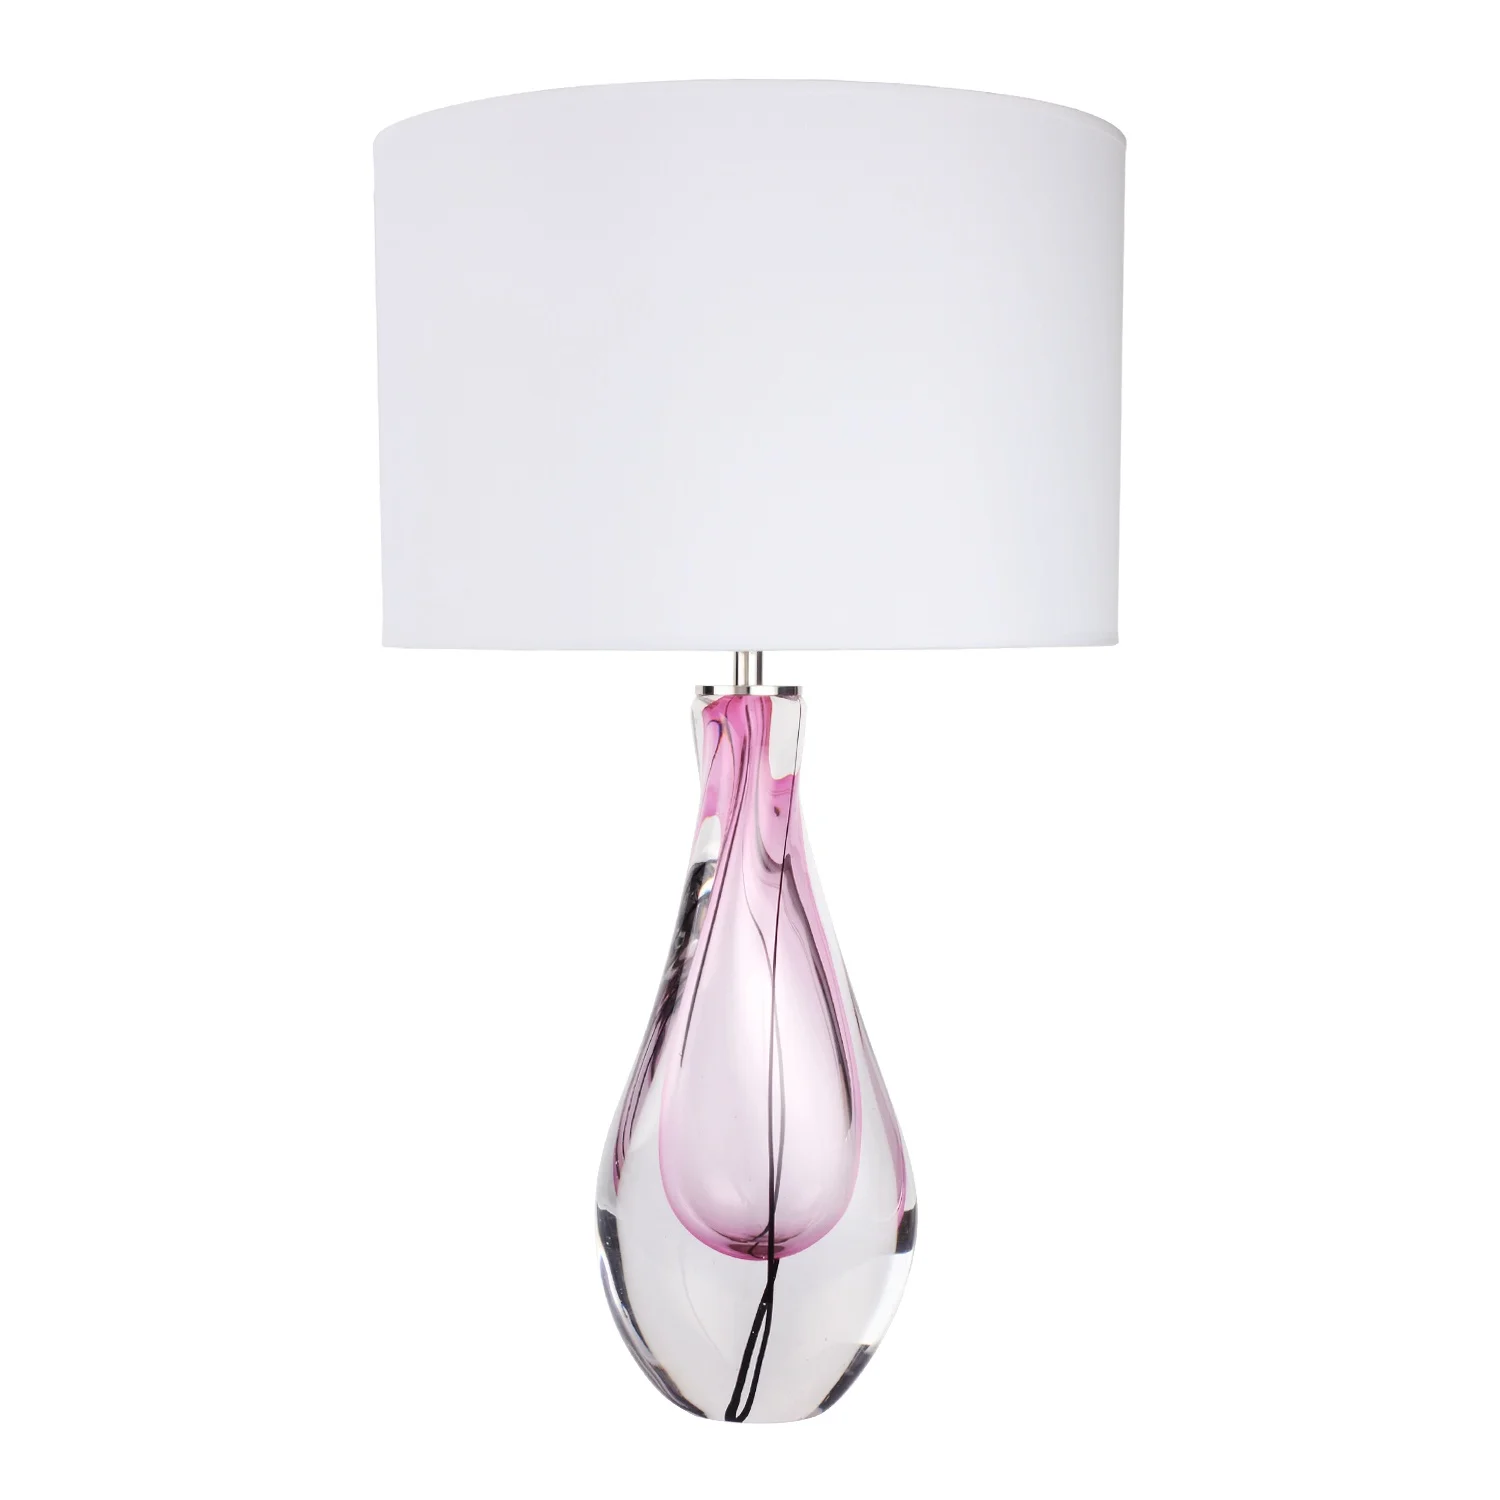 Hand Made Craft Pink Coloured Glaze Murano Glass Table Lamp for Amazon sell